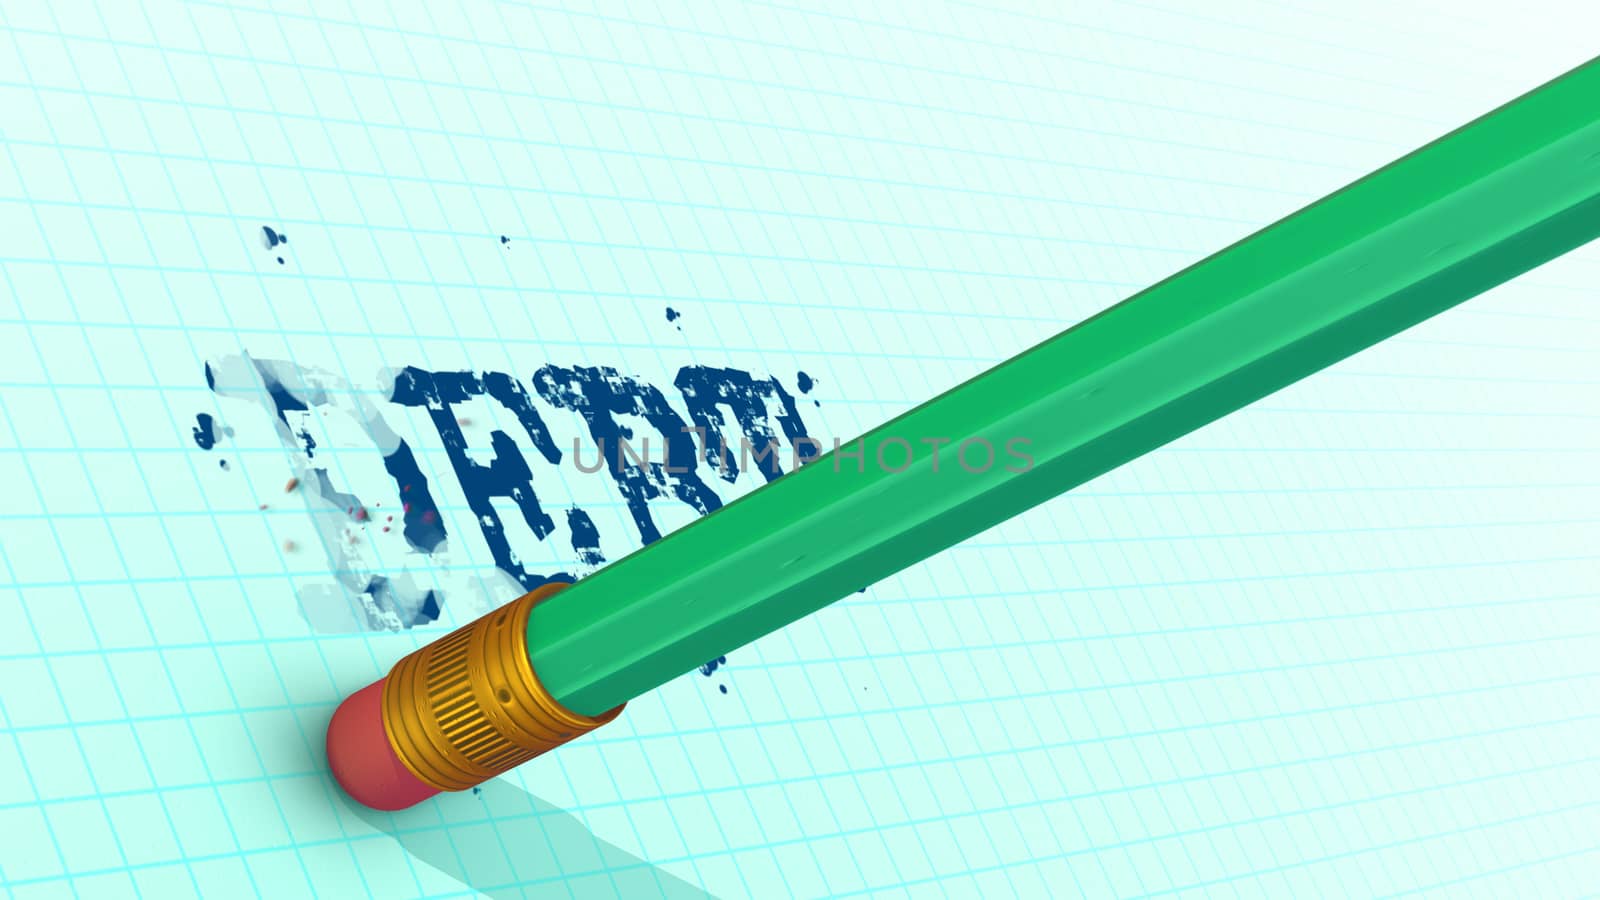 Optimistic 3d rendering of a hexagonal green pencil with a ferrule and eraser deleting debt word from a white sheet with a grid. It looks cheerful.